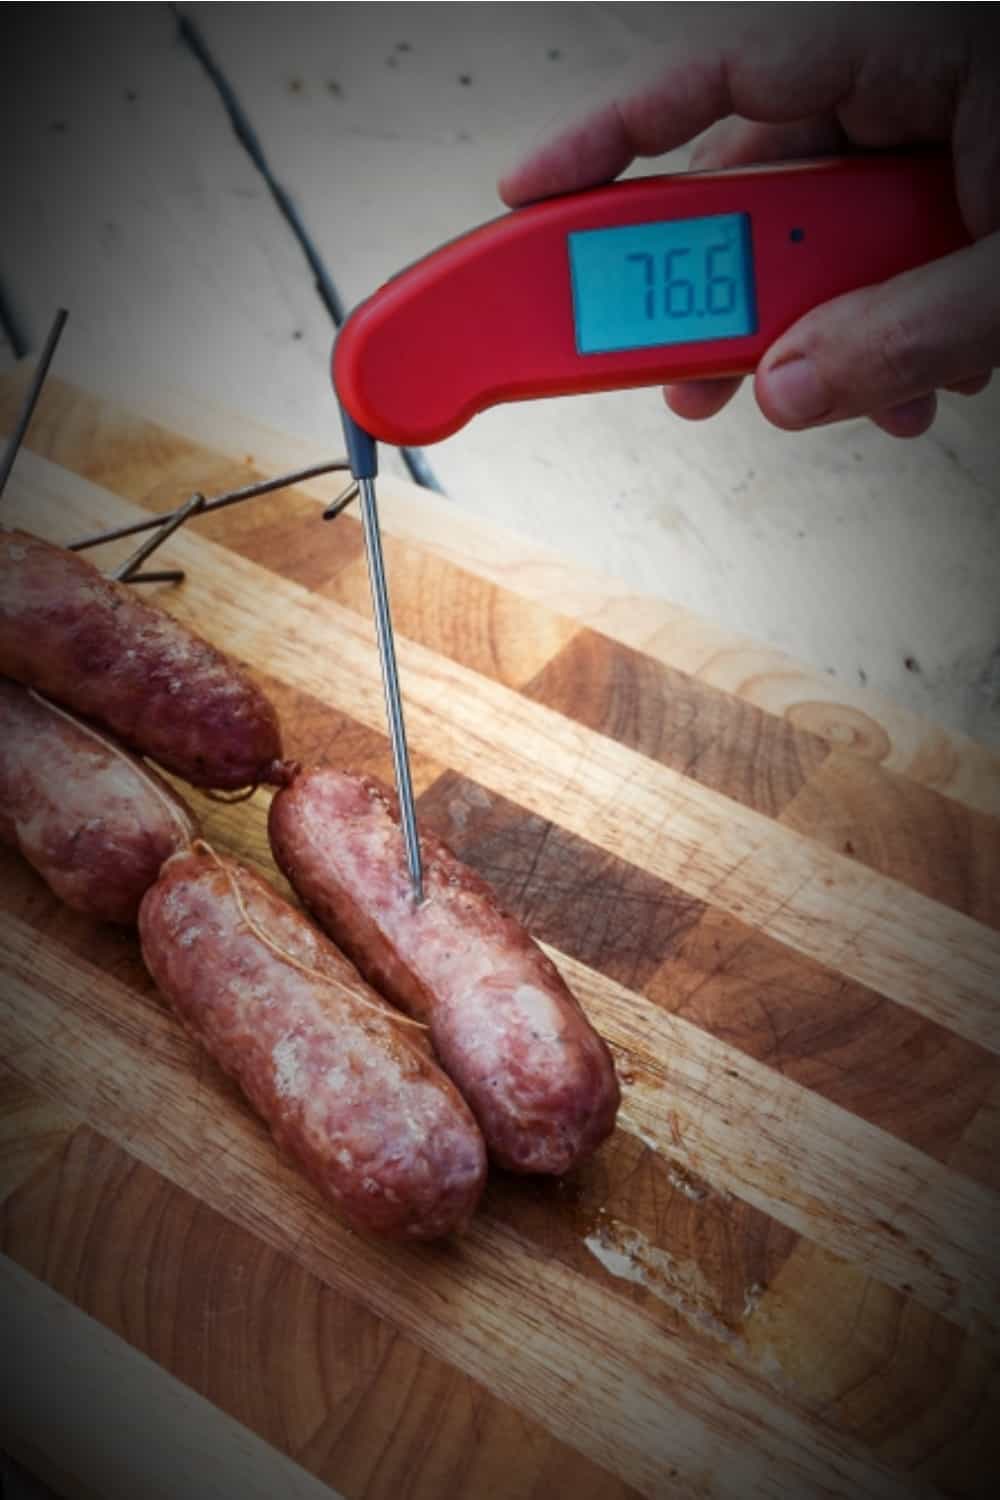 measuring the doneness of the sausage with a thermostat